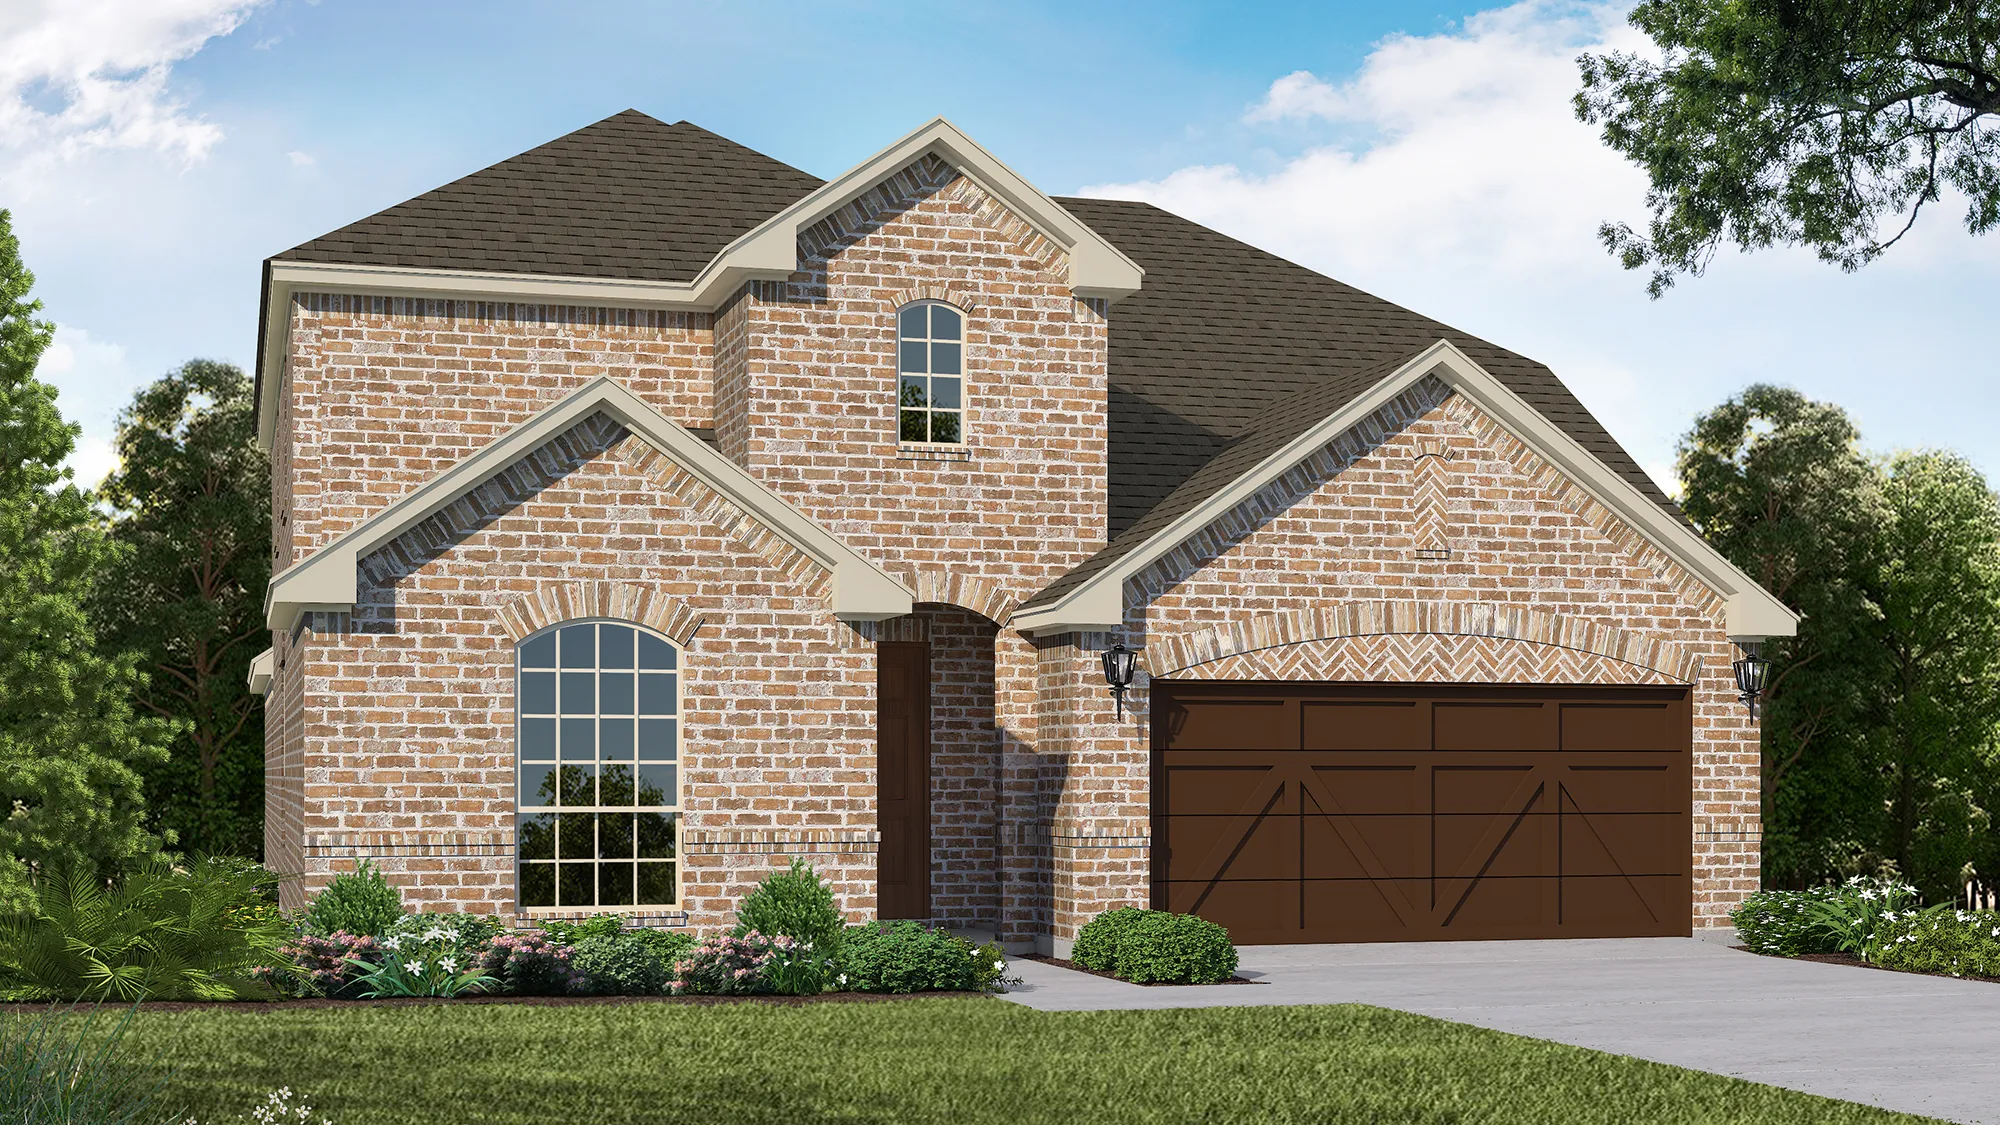 Plan 1525 Elevation A by American Legend Homes